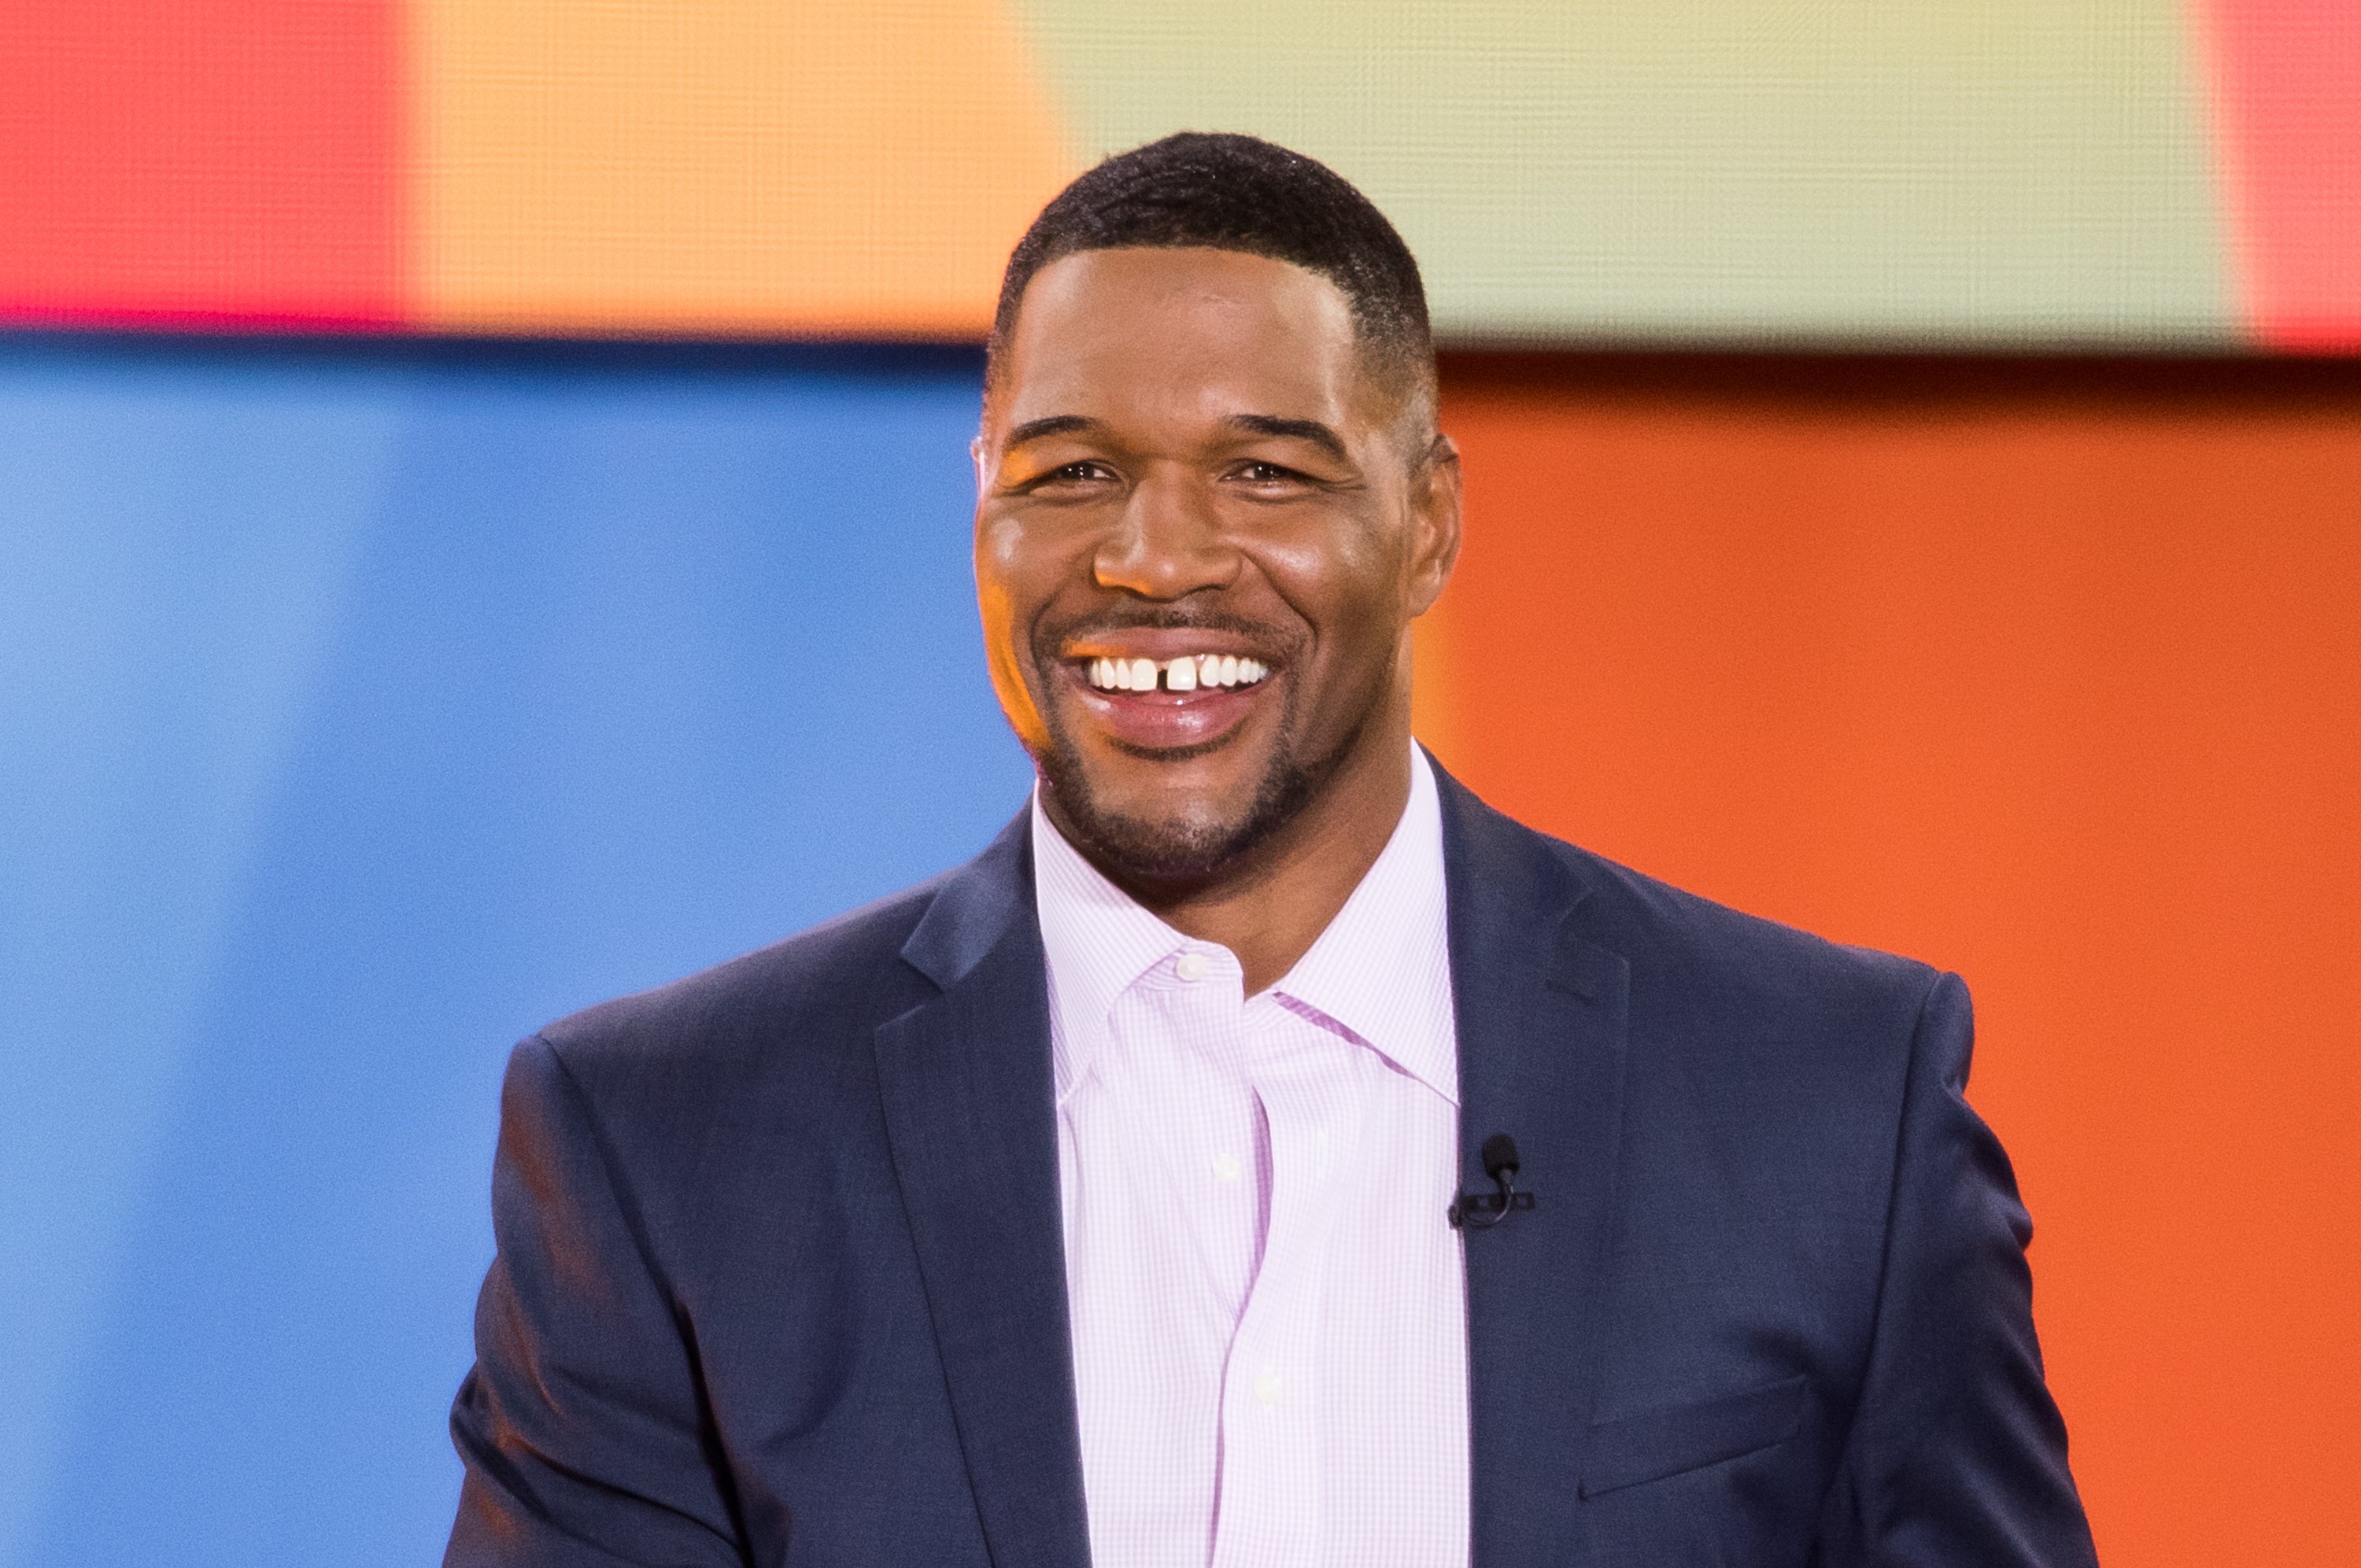 Michael Strahan attends ABC's "Good Morning America" at Rumsey Playfield, Central Park on July 6, 2018. | Source: Getty Images